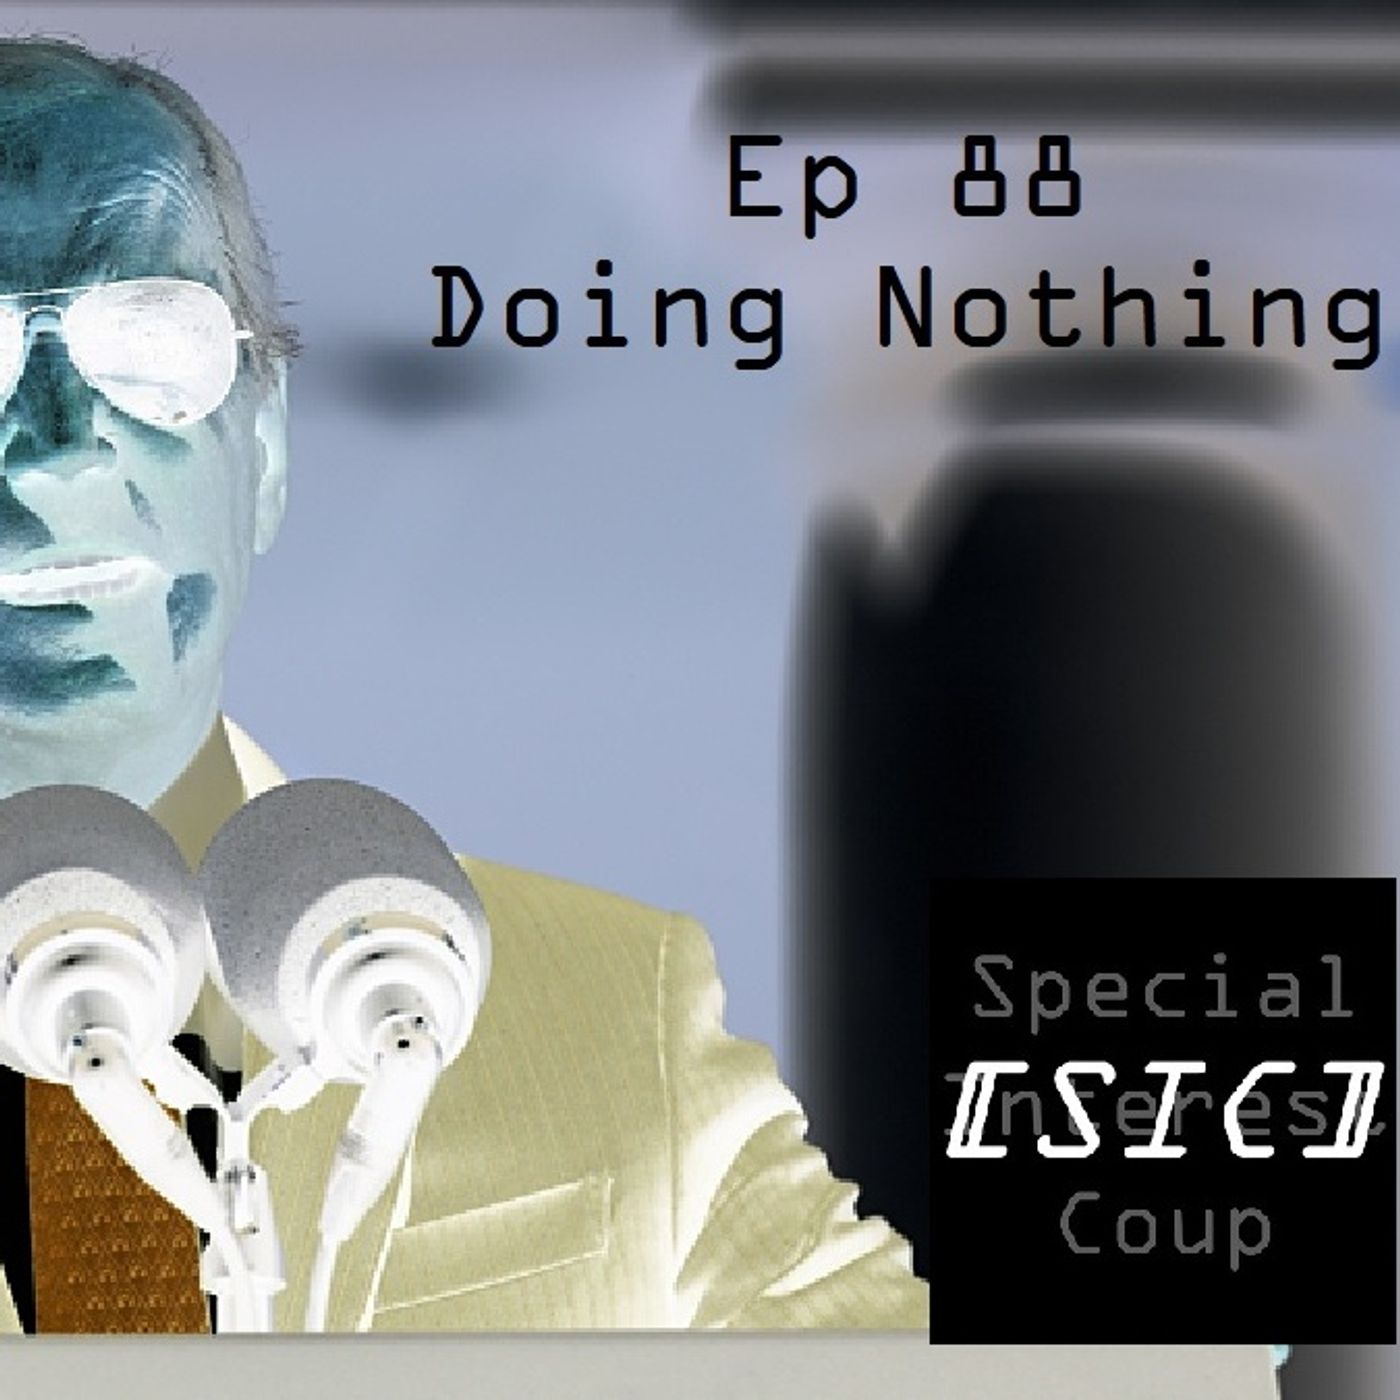 Ep 88 - Doing Nothing